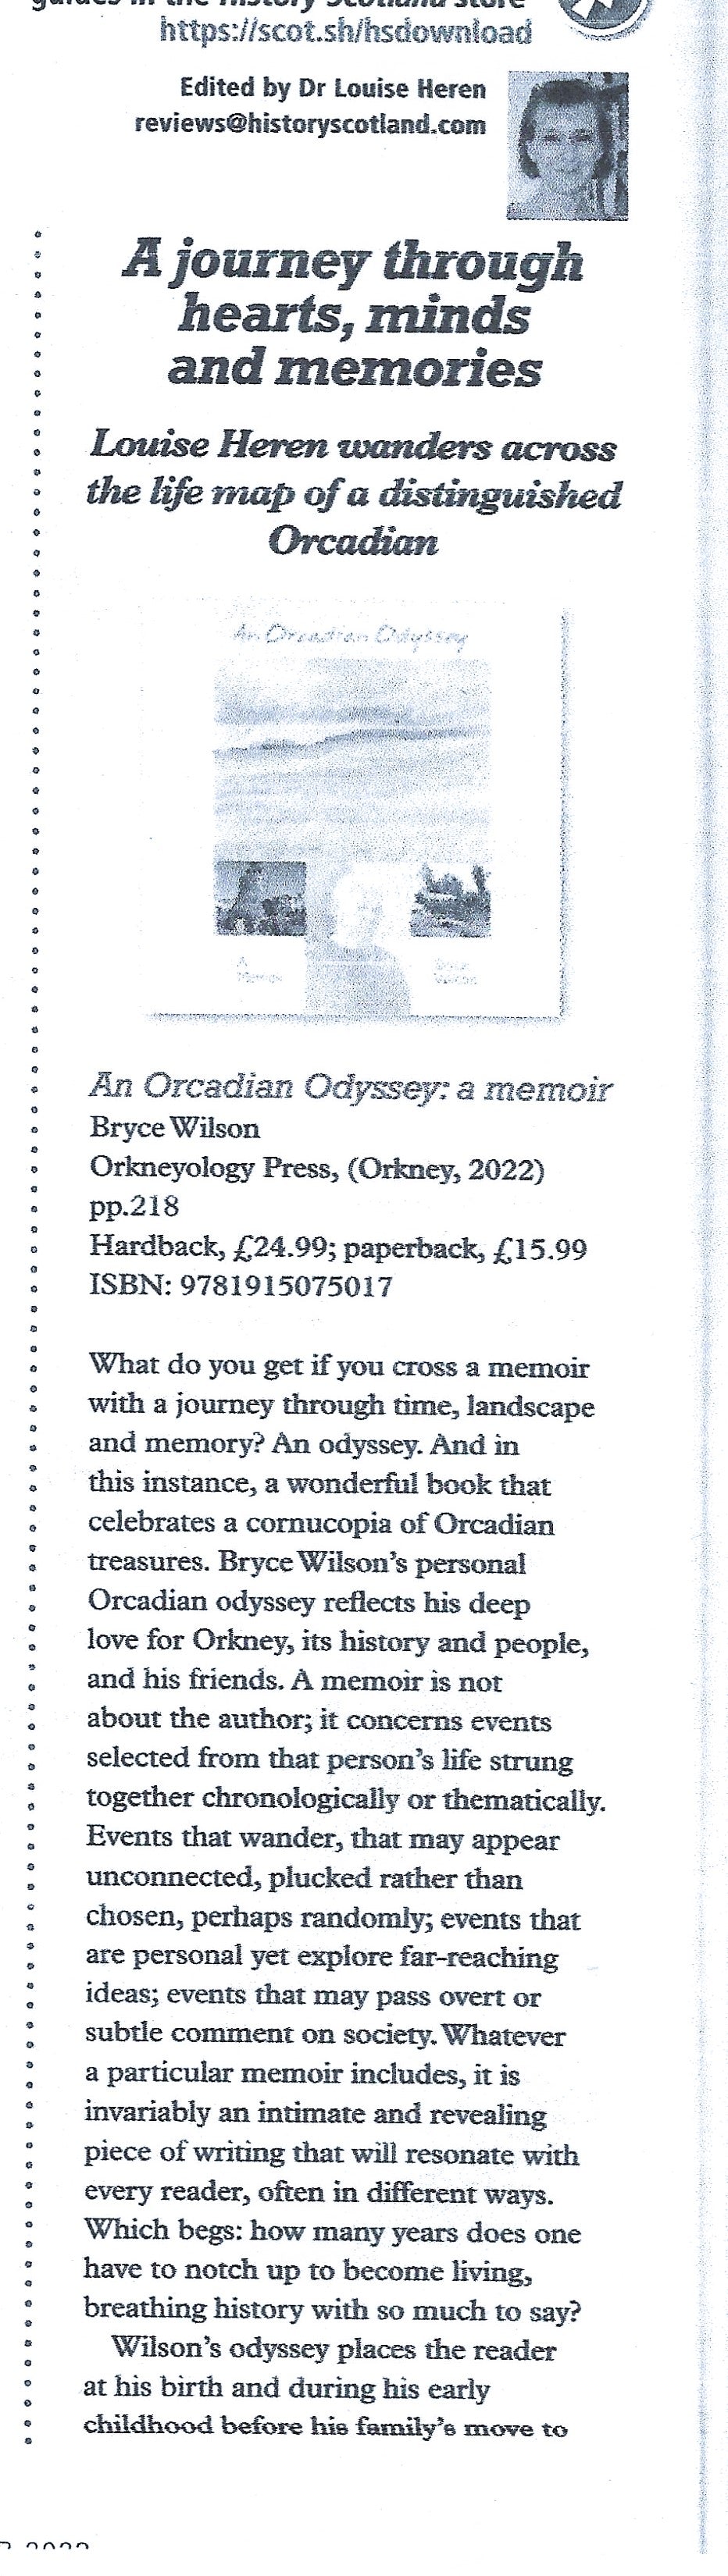 A review of Bryce Wilson's An Orcadian Odyssey as published in History Scotland magazine in 2023, written by Dr Louise Heren.